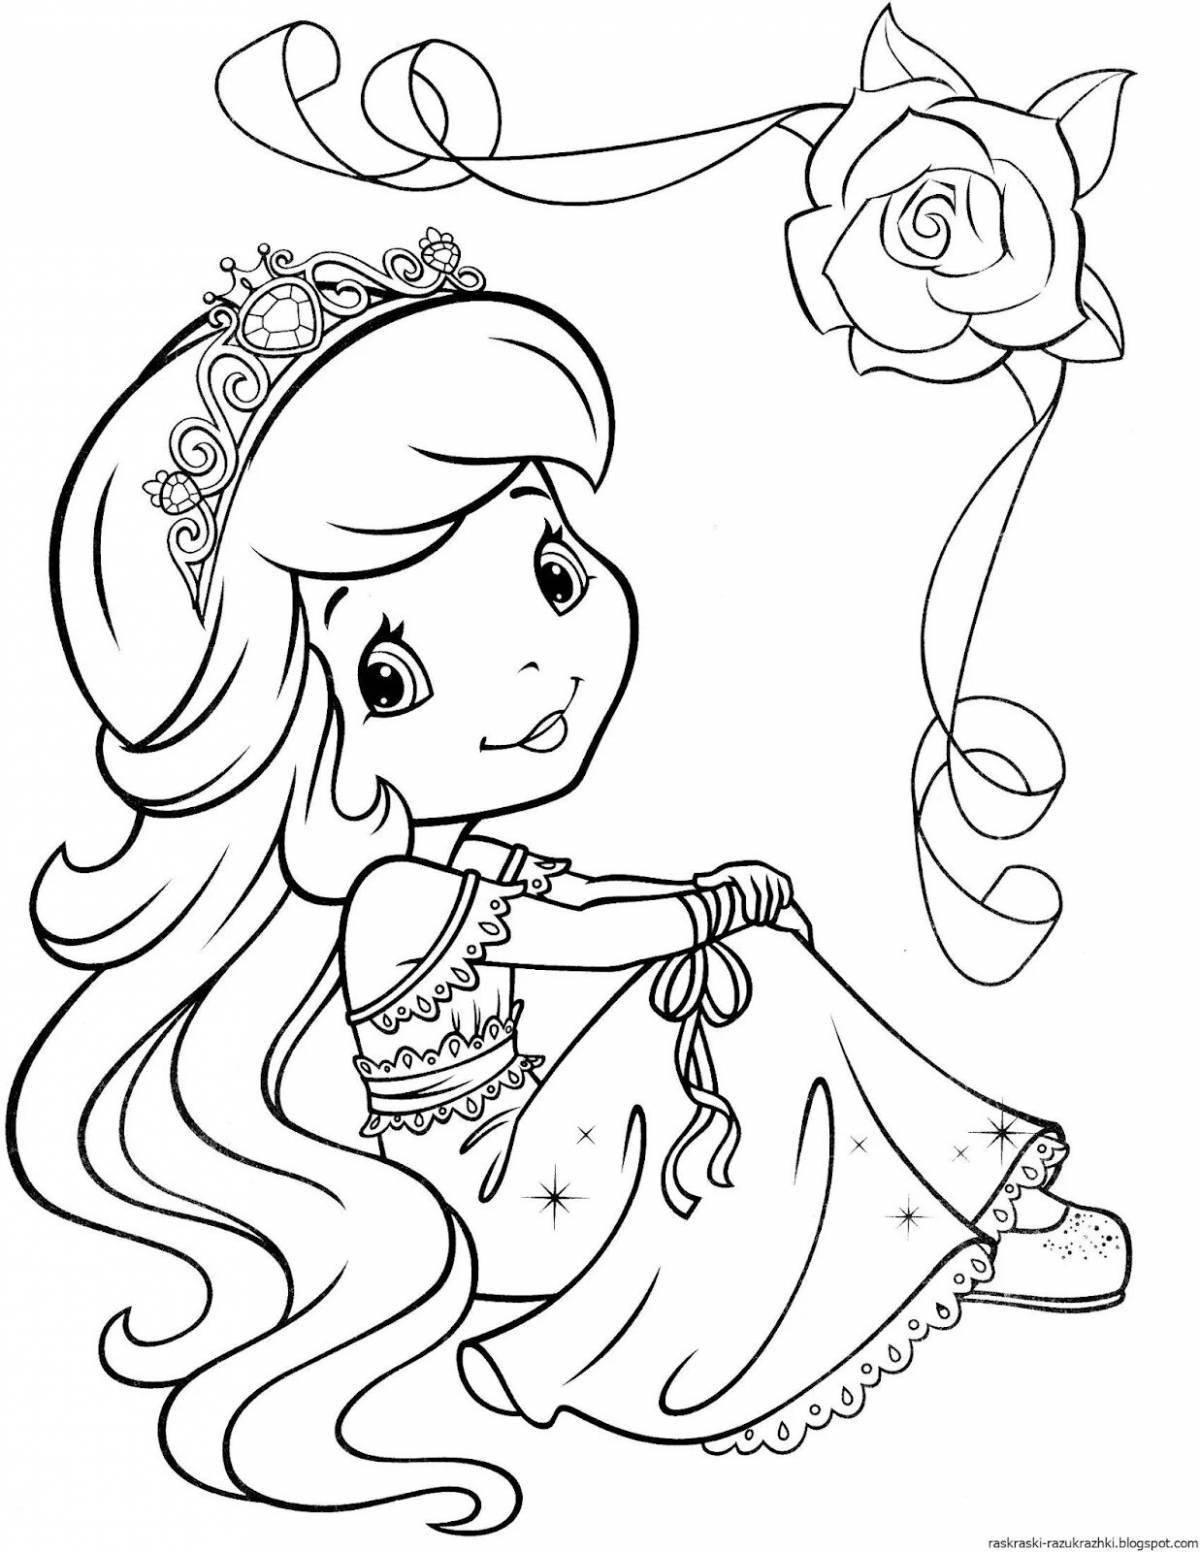 Sparkly coloring book for girls